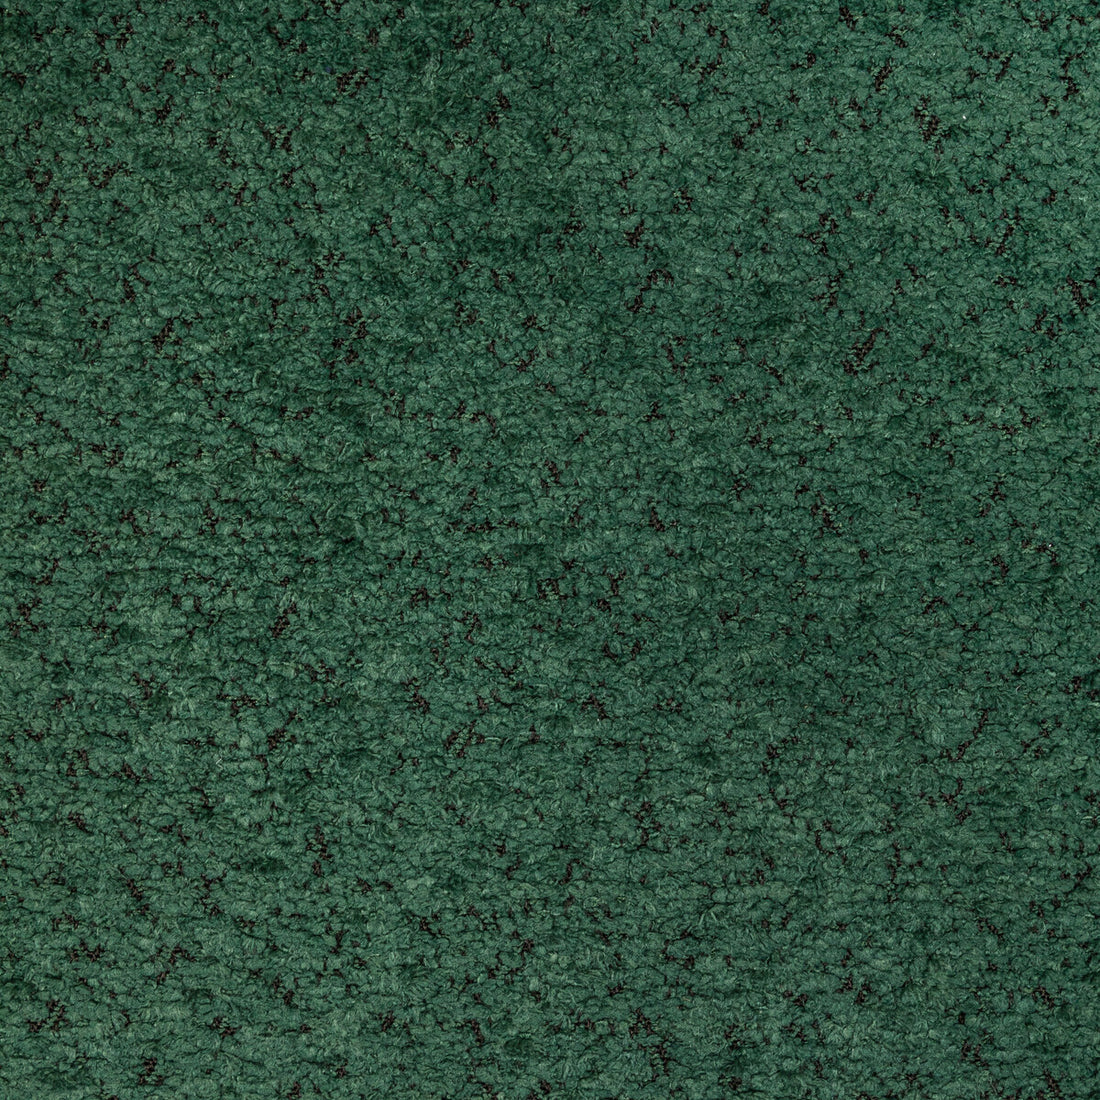 Marino fabric in jade color - pattern 36746.3.0 - by Kravet Contract in the Refined Textures Performance Crypton collection